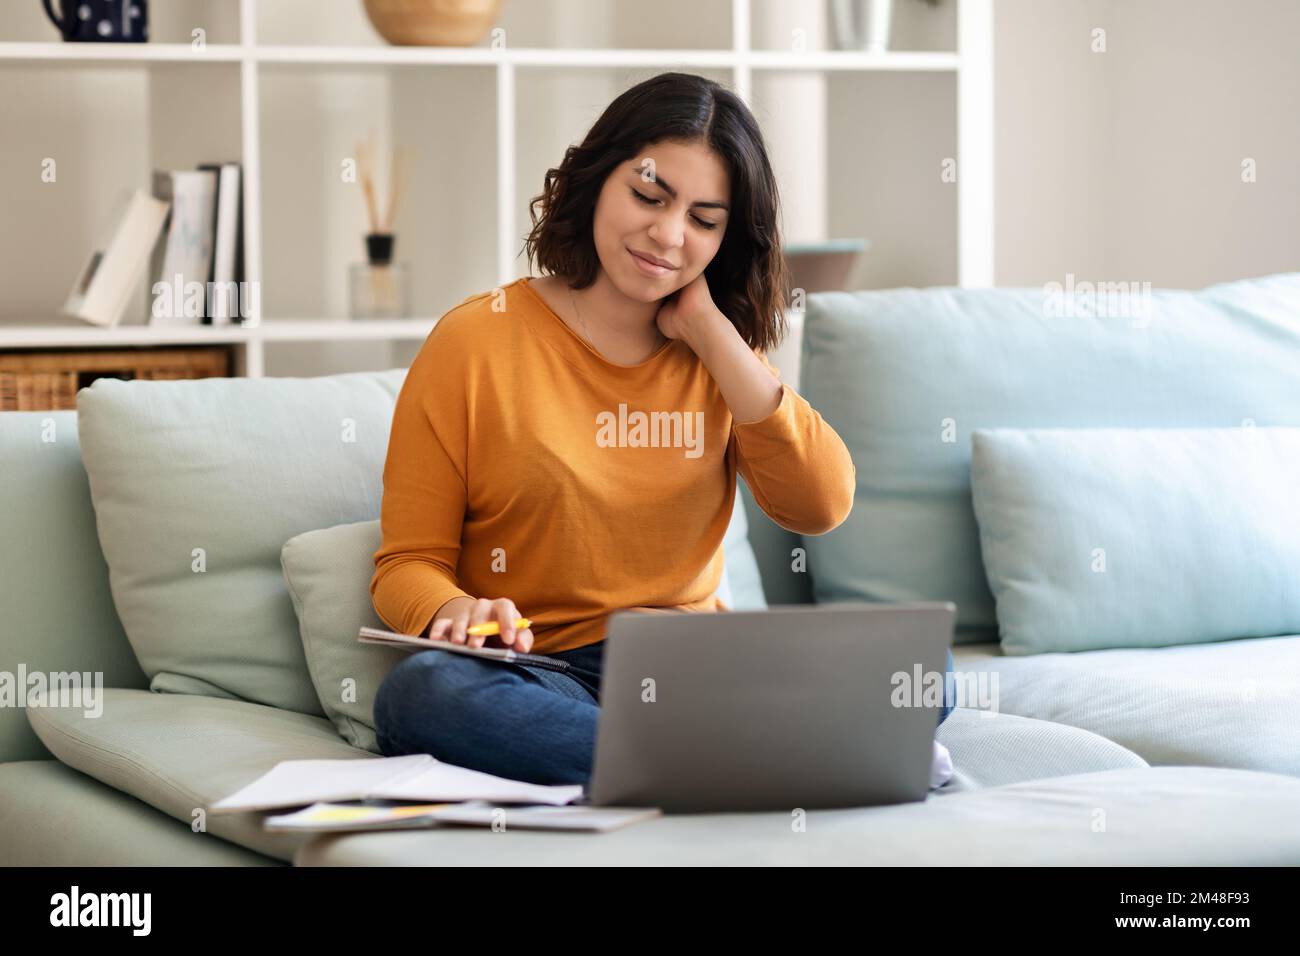 Young Arab Woman Suffering Neck Pain While Working With Laptop At Home Stock Photo